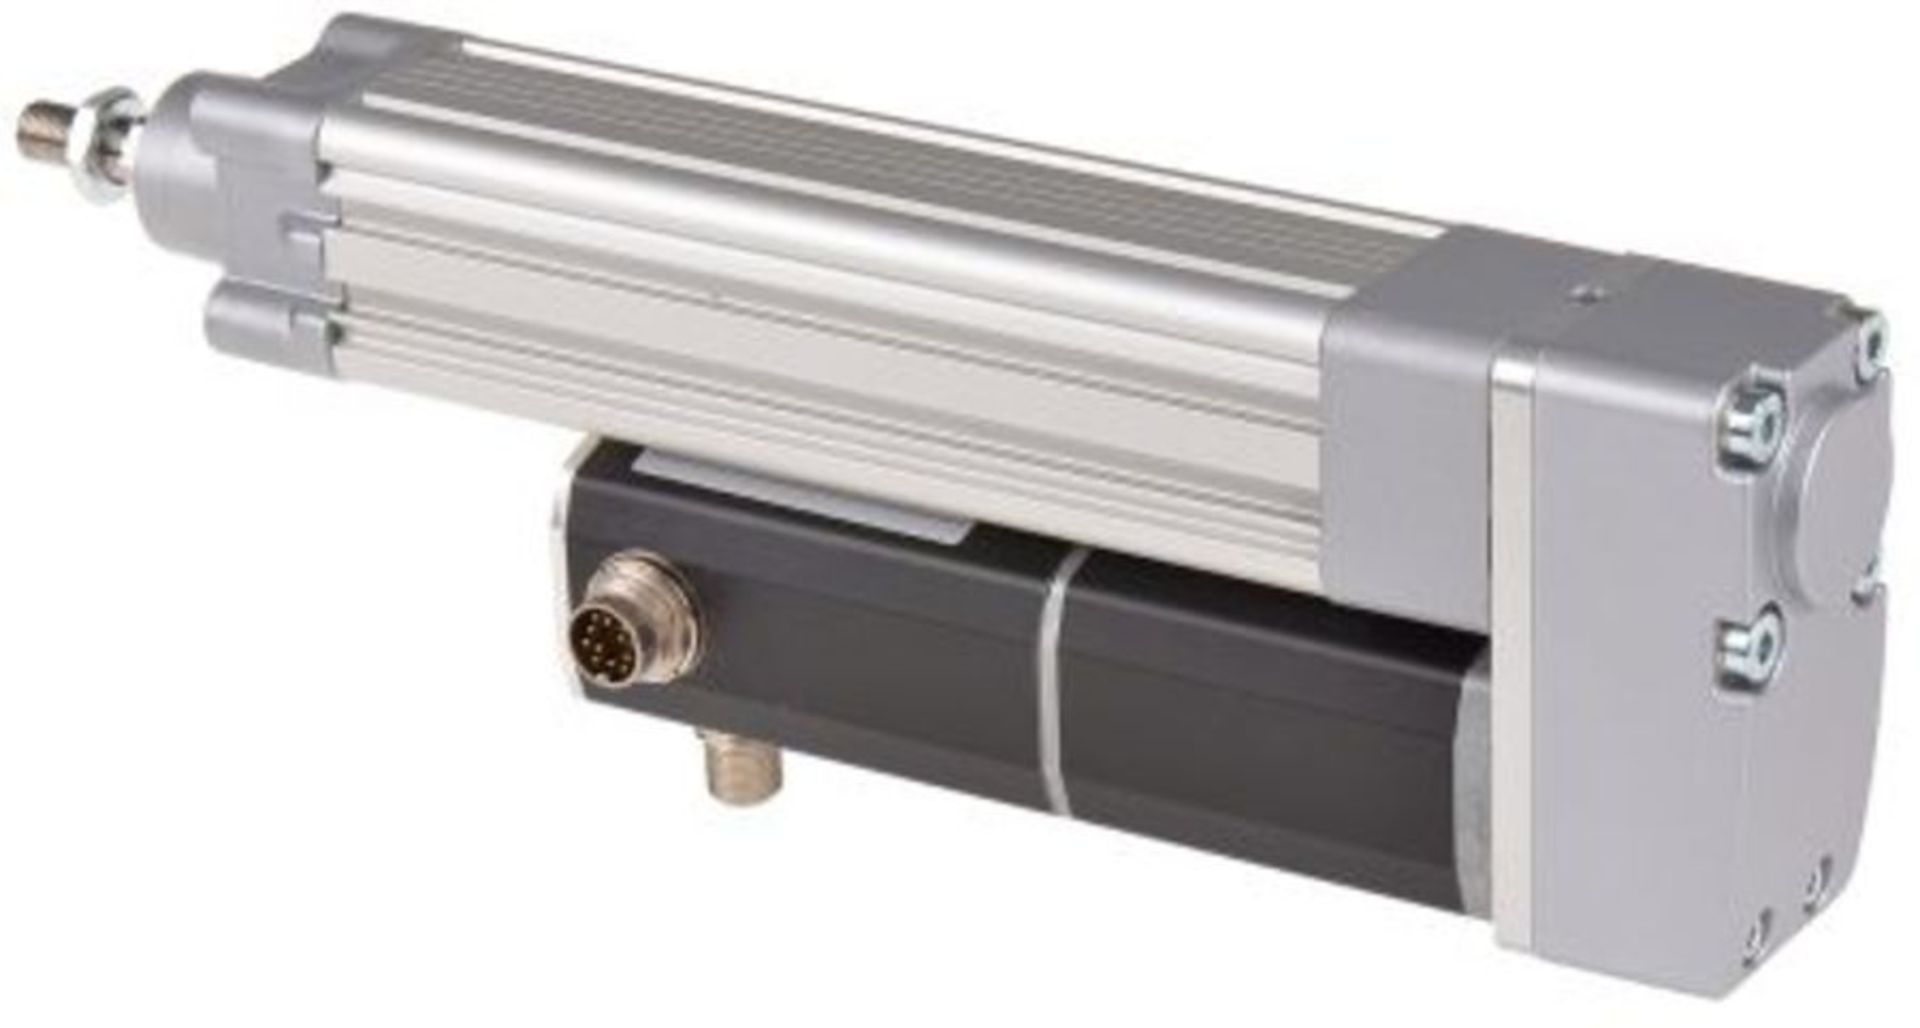 SKF Linear Actuator CASM-32 Series, 100mm stroke - 8802090 - Image 2 of 4